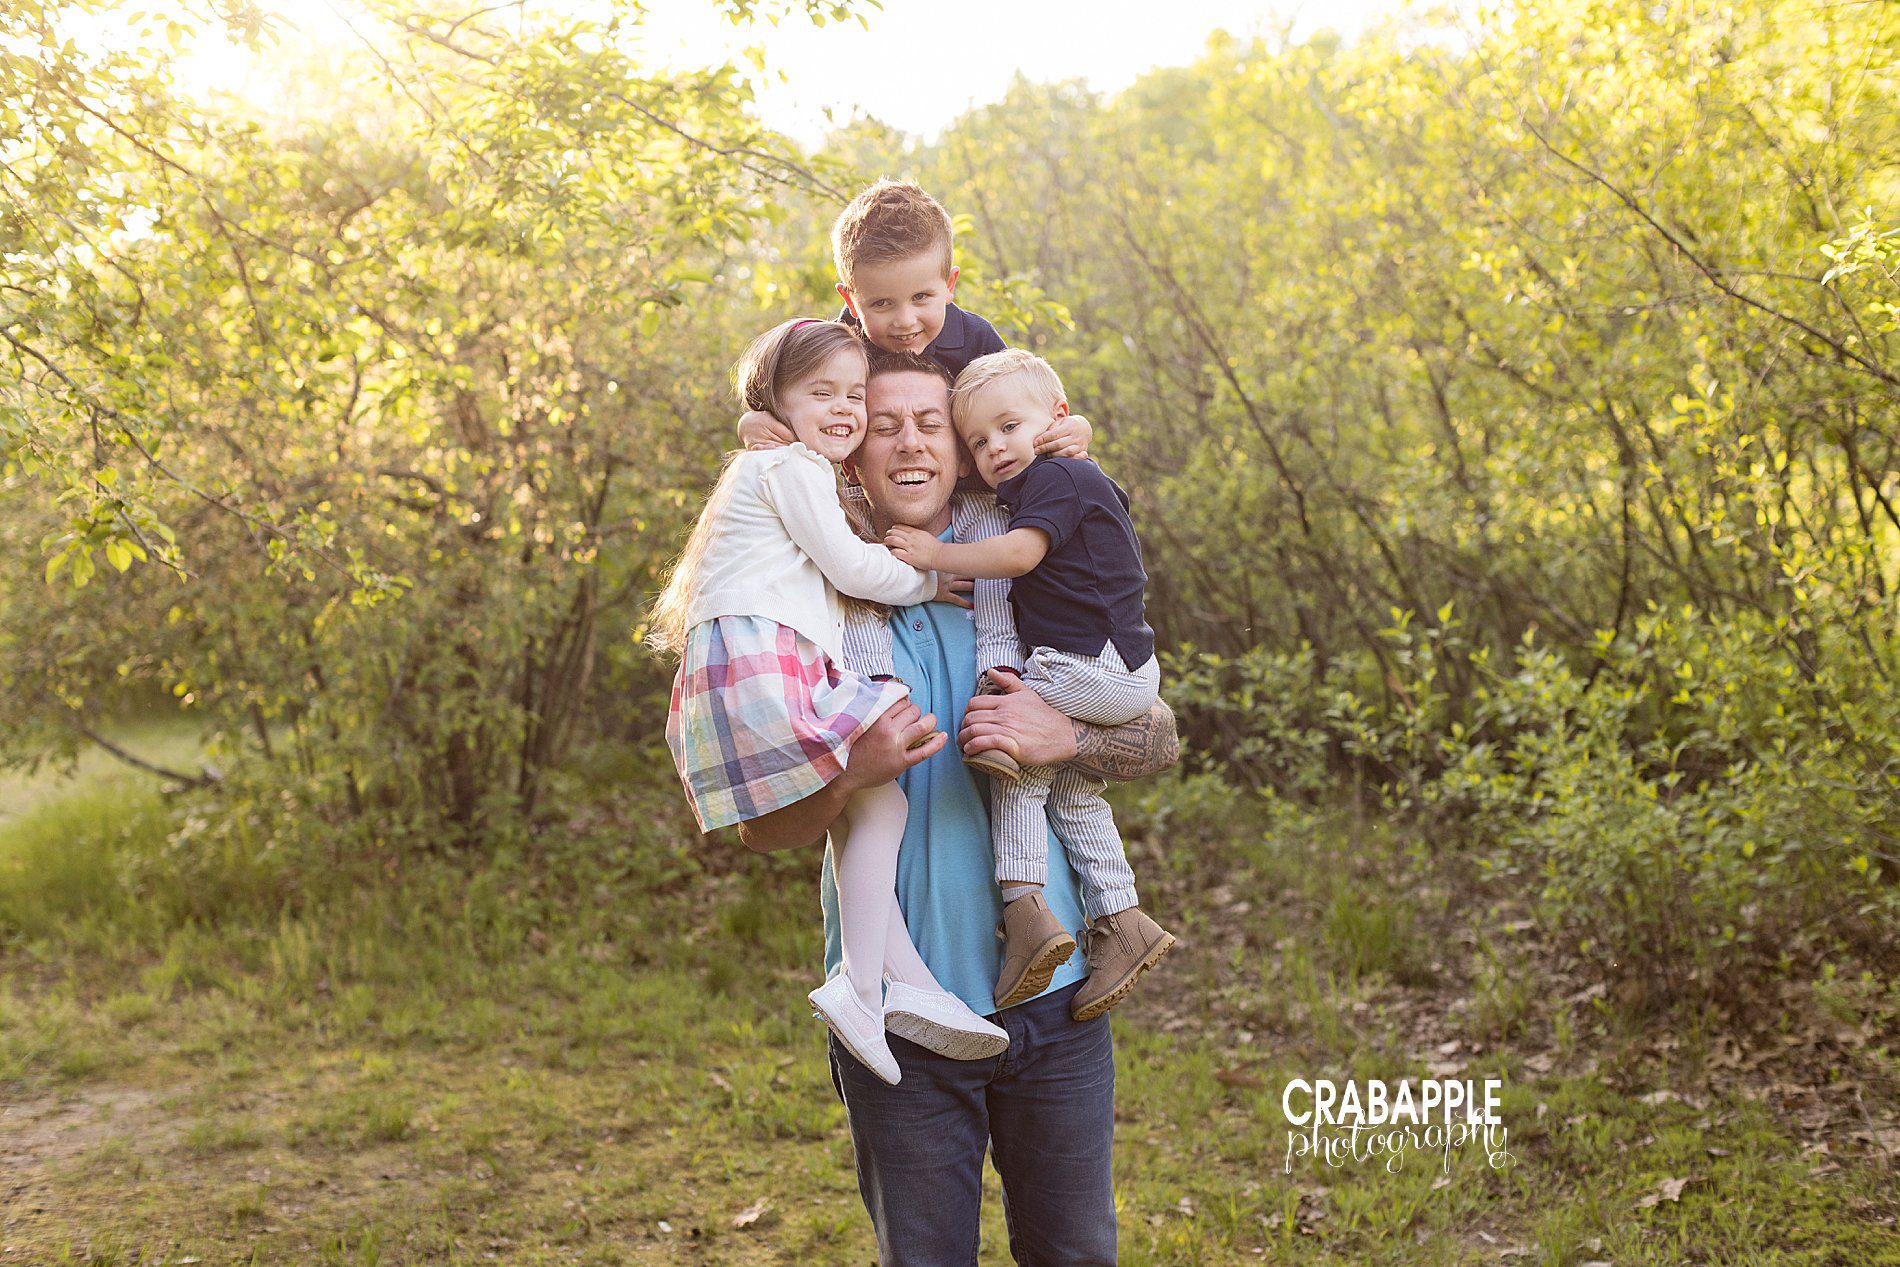 Sweet and creative family portrait posing ideas with dad holding all of his kids.